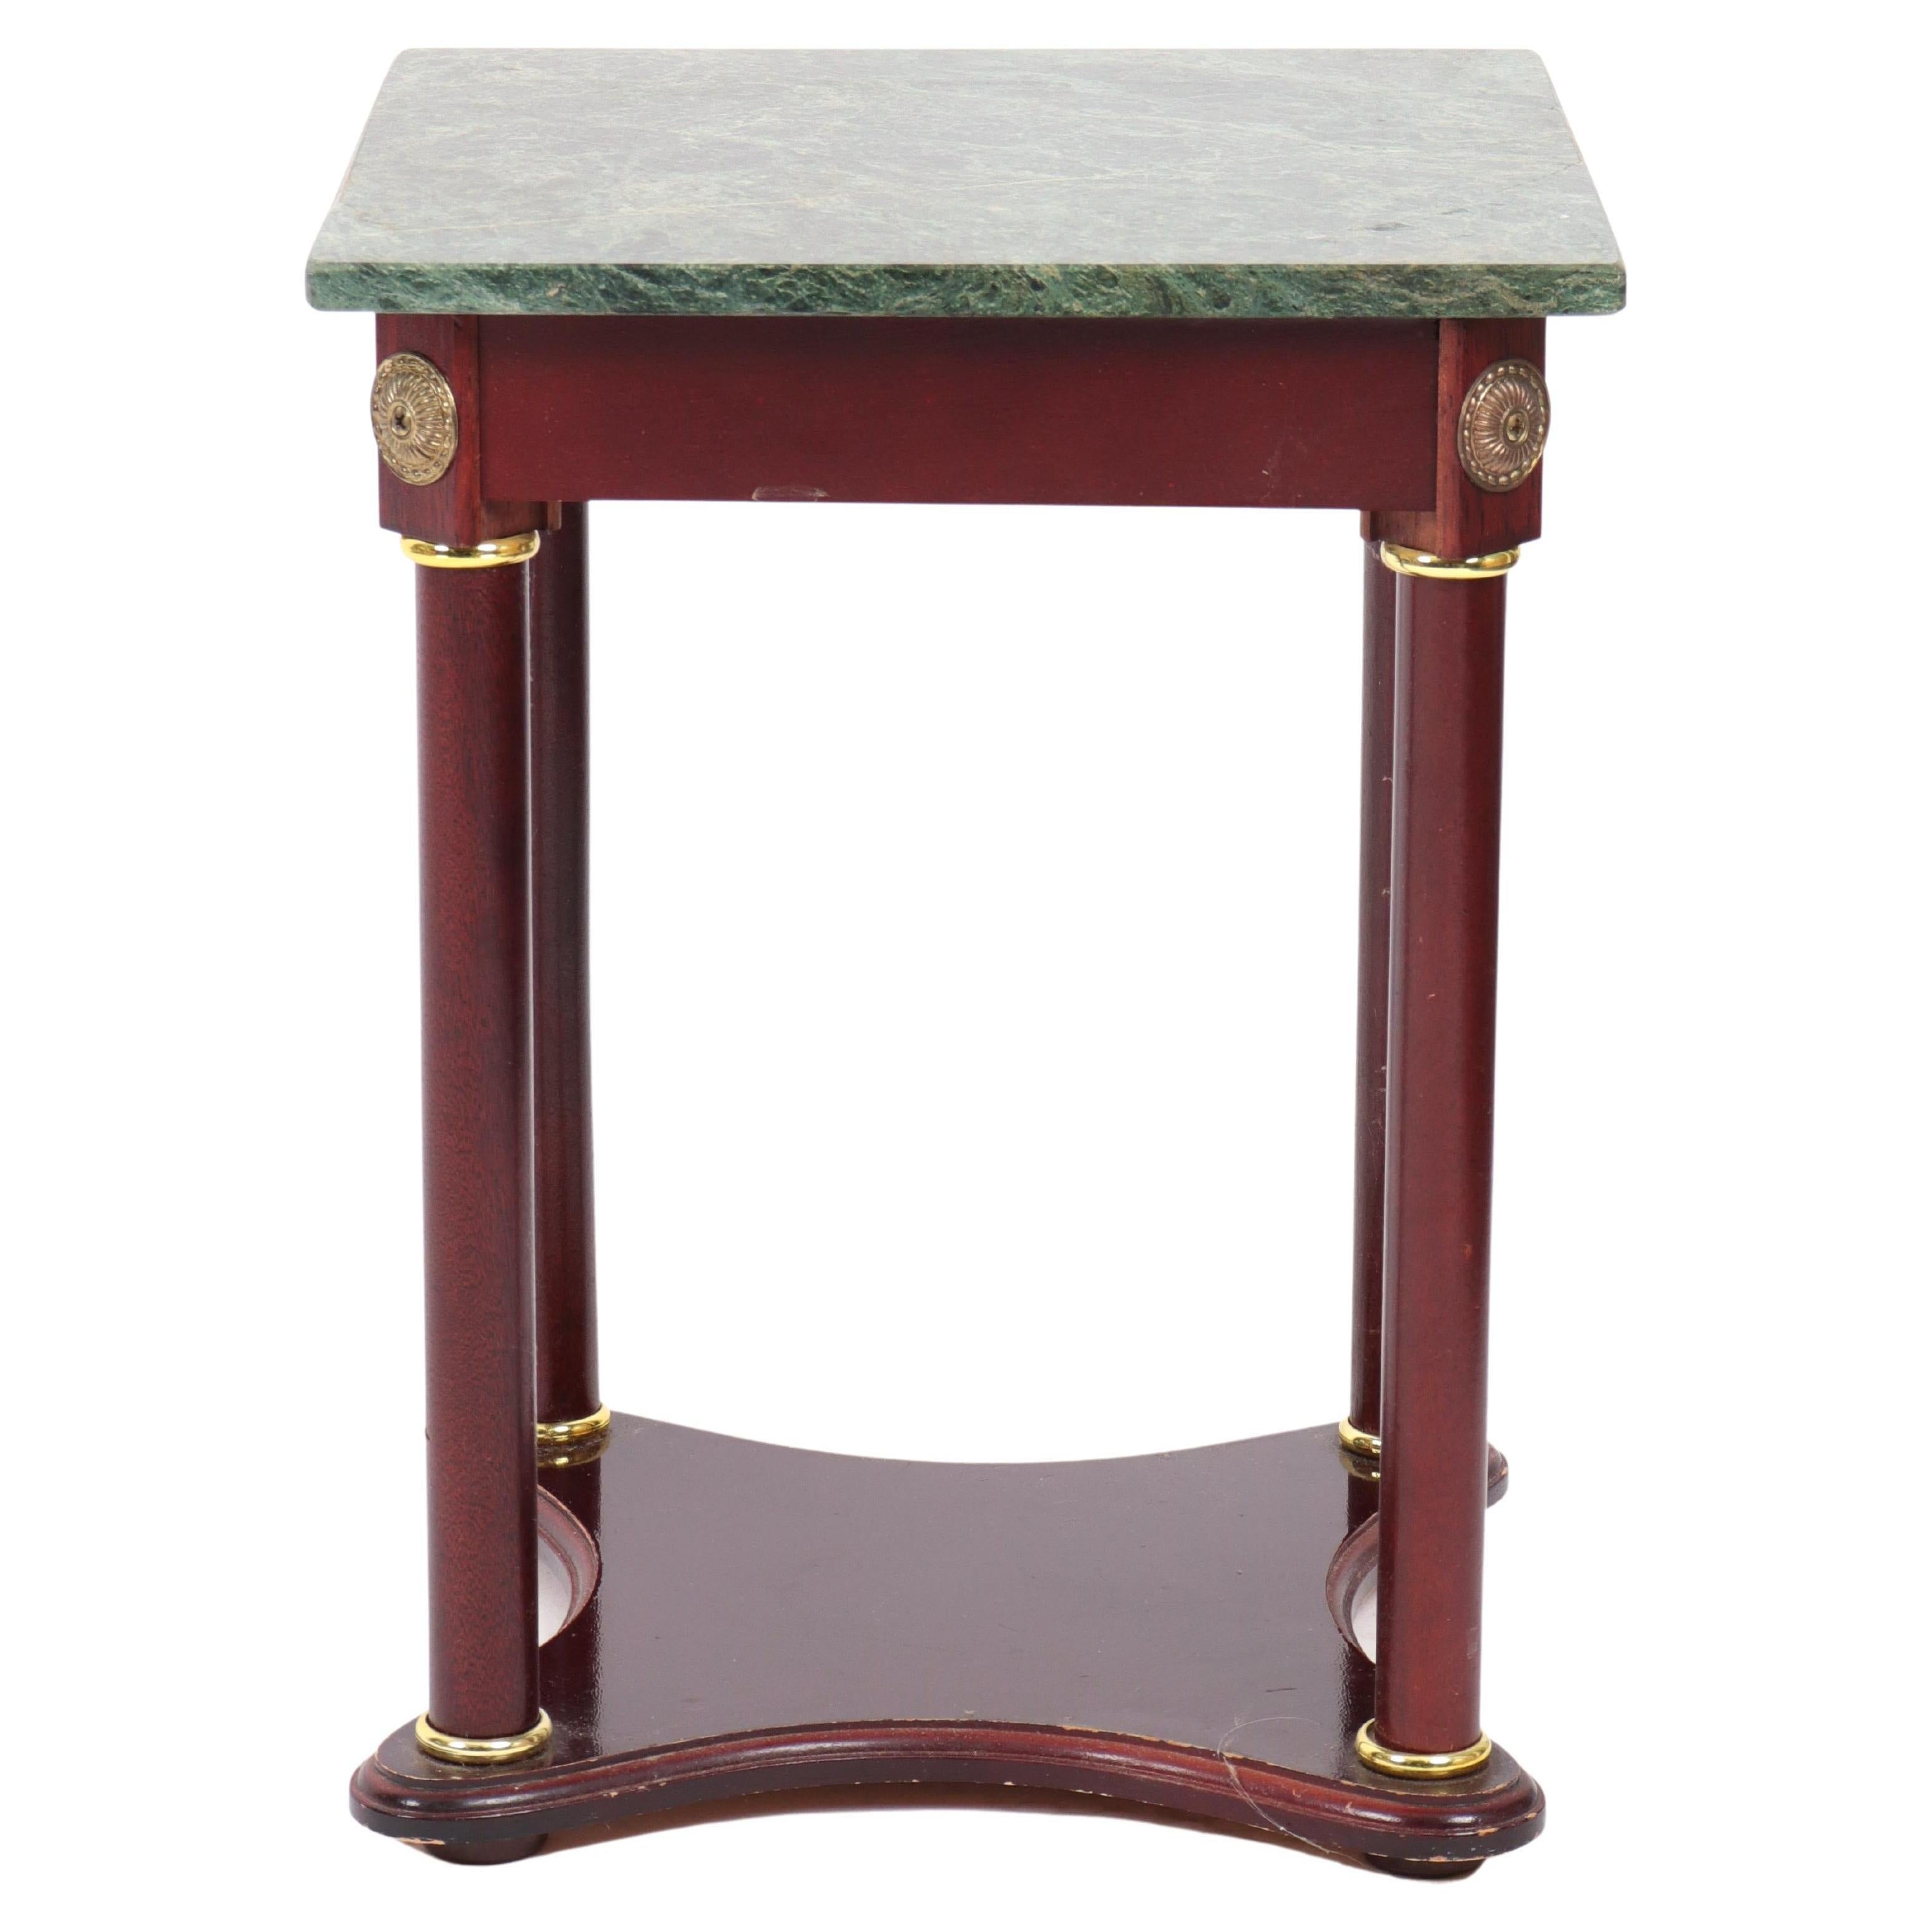 French Provincial French Empire Manner Miniature Side Table For Sale